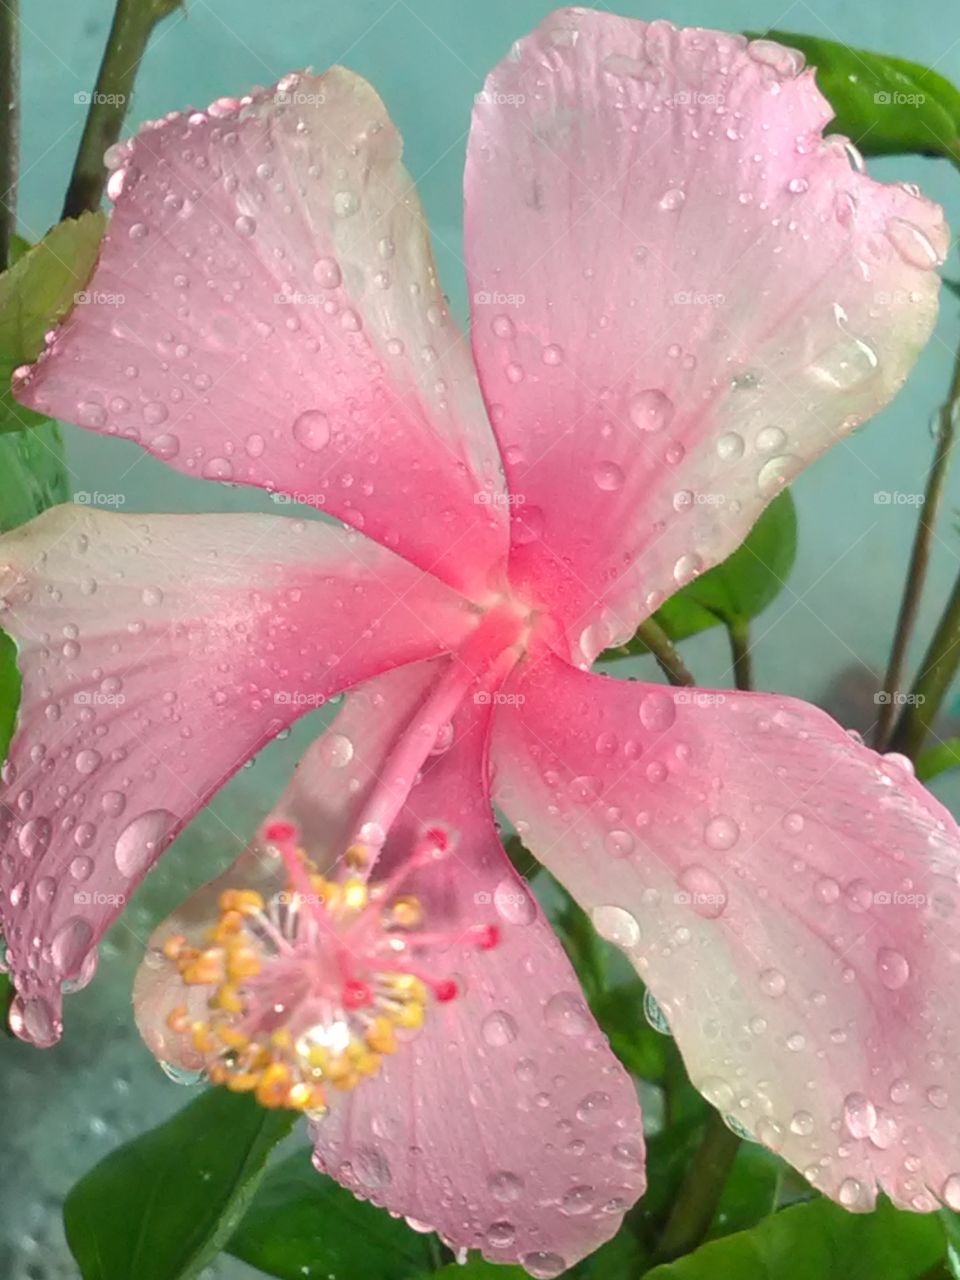 This is a very beautiful flower pink, wite, coddle flowers on water drops.